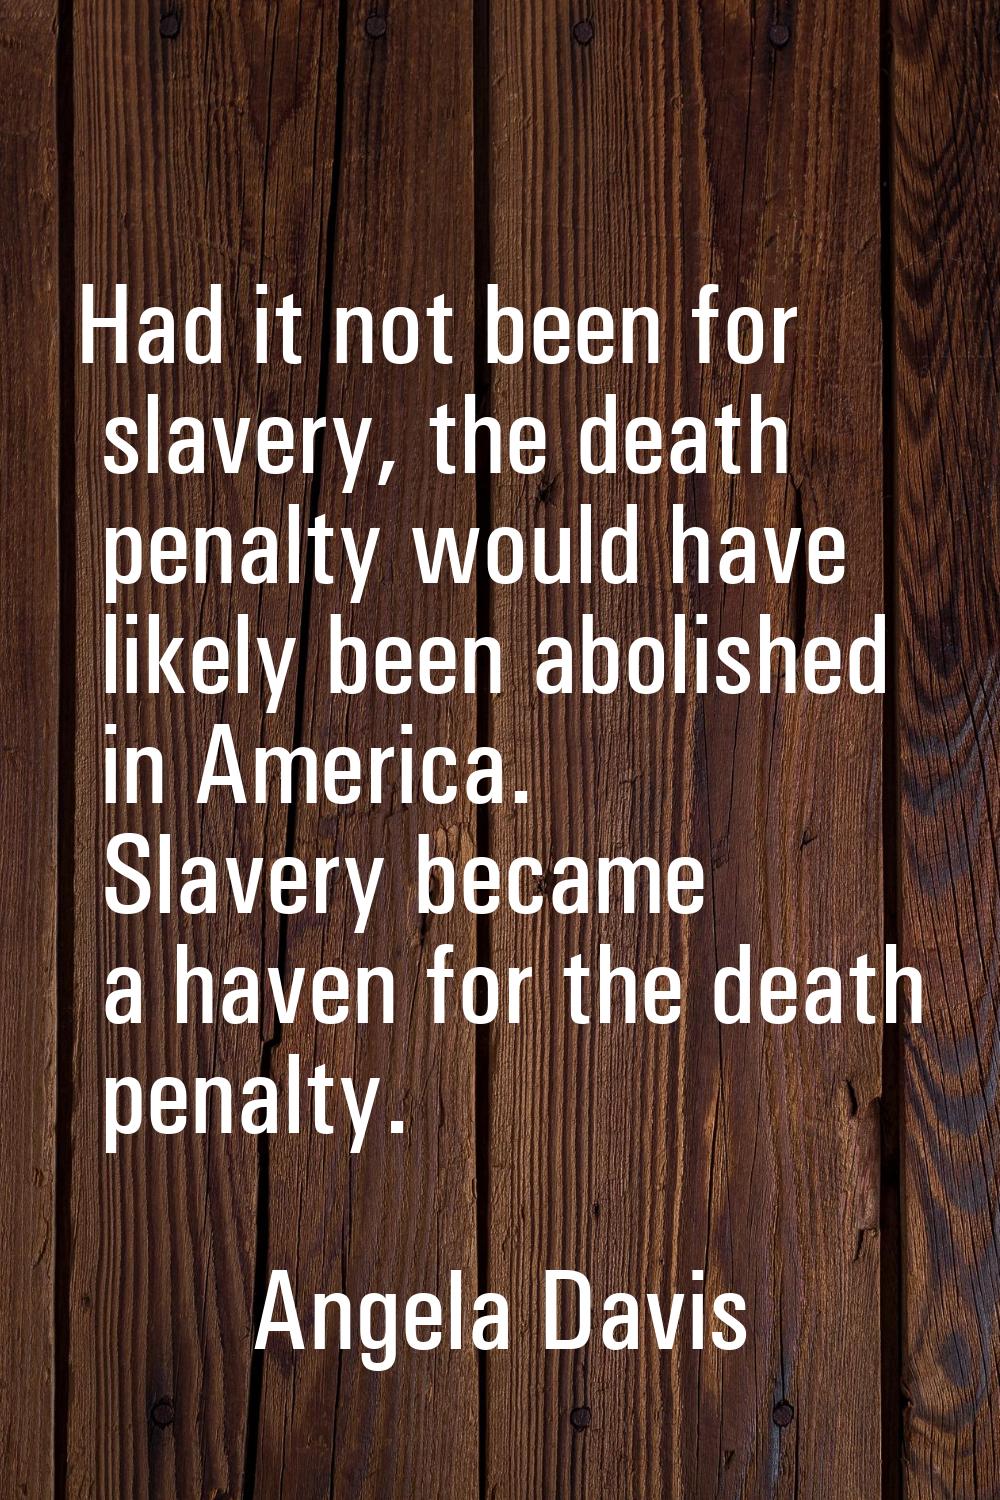 Had it not been for slavery, the death penalty would have likely been abolished in America. Slavery